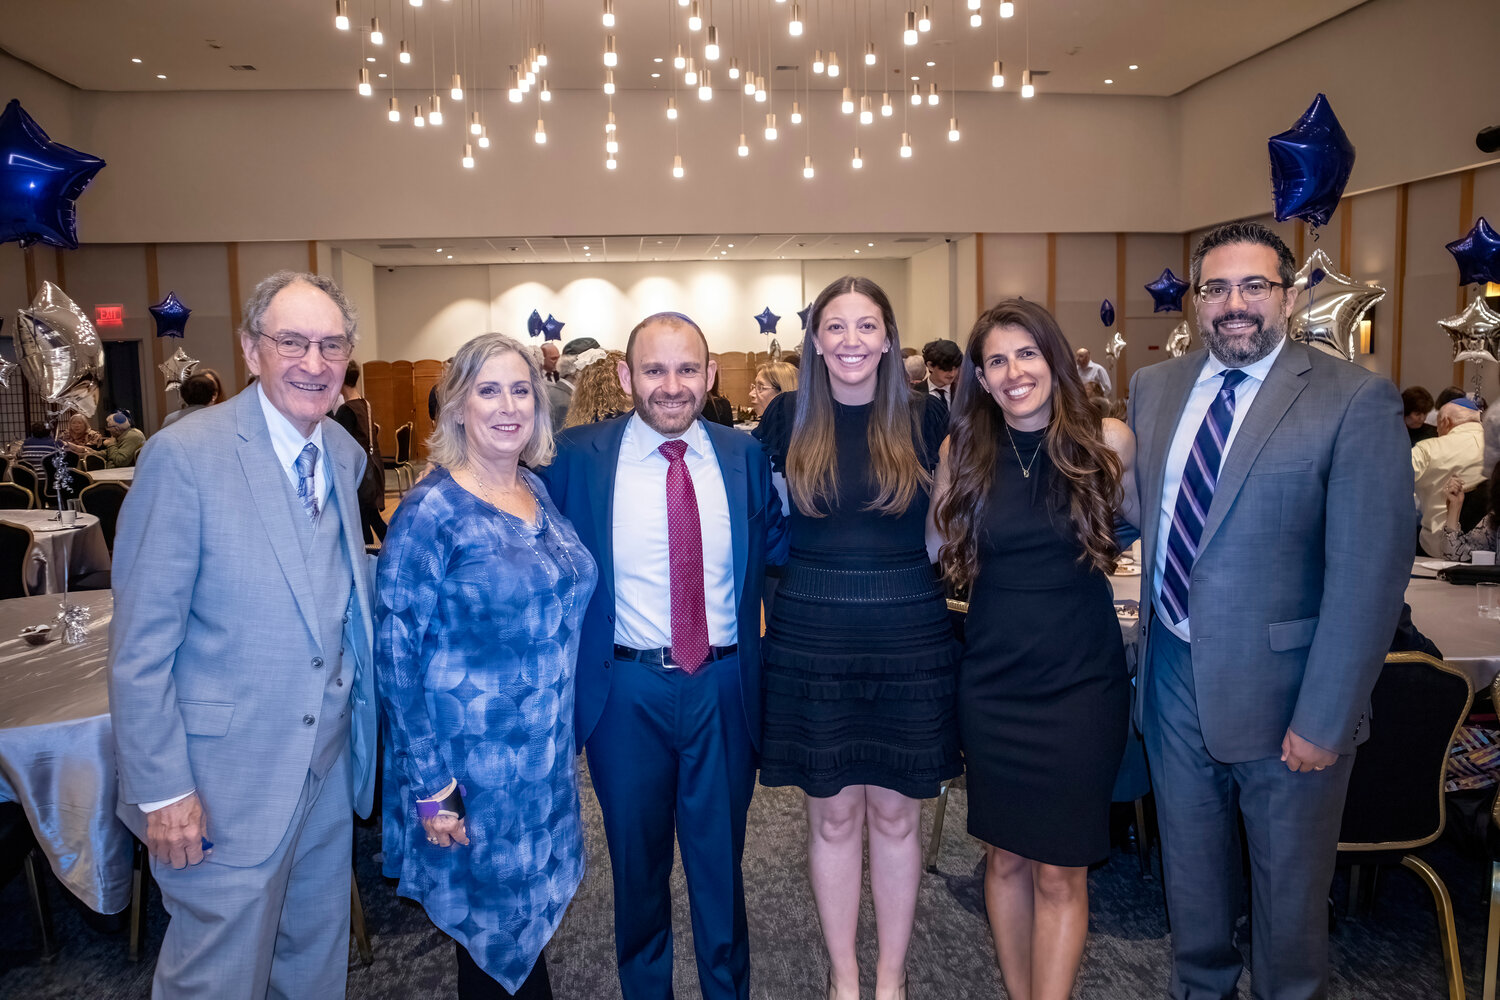 A dedicated committee from the synagogue made the installion process possible. Rabbi Dorsch, center, with from left, Dr. Steven Kussin, Rena Cohen Kozin, Naomi Knee and Matthew Knee.